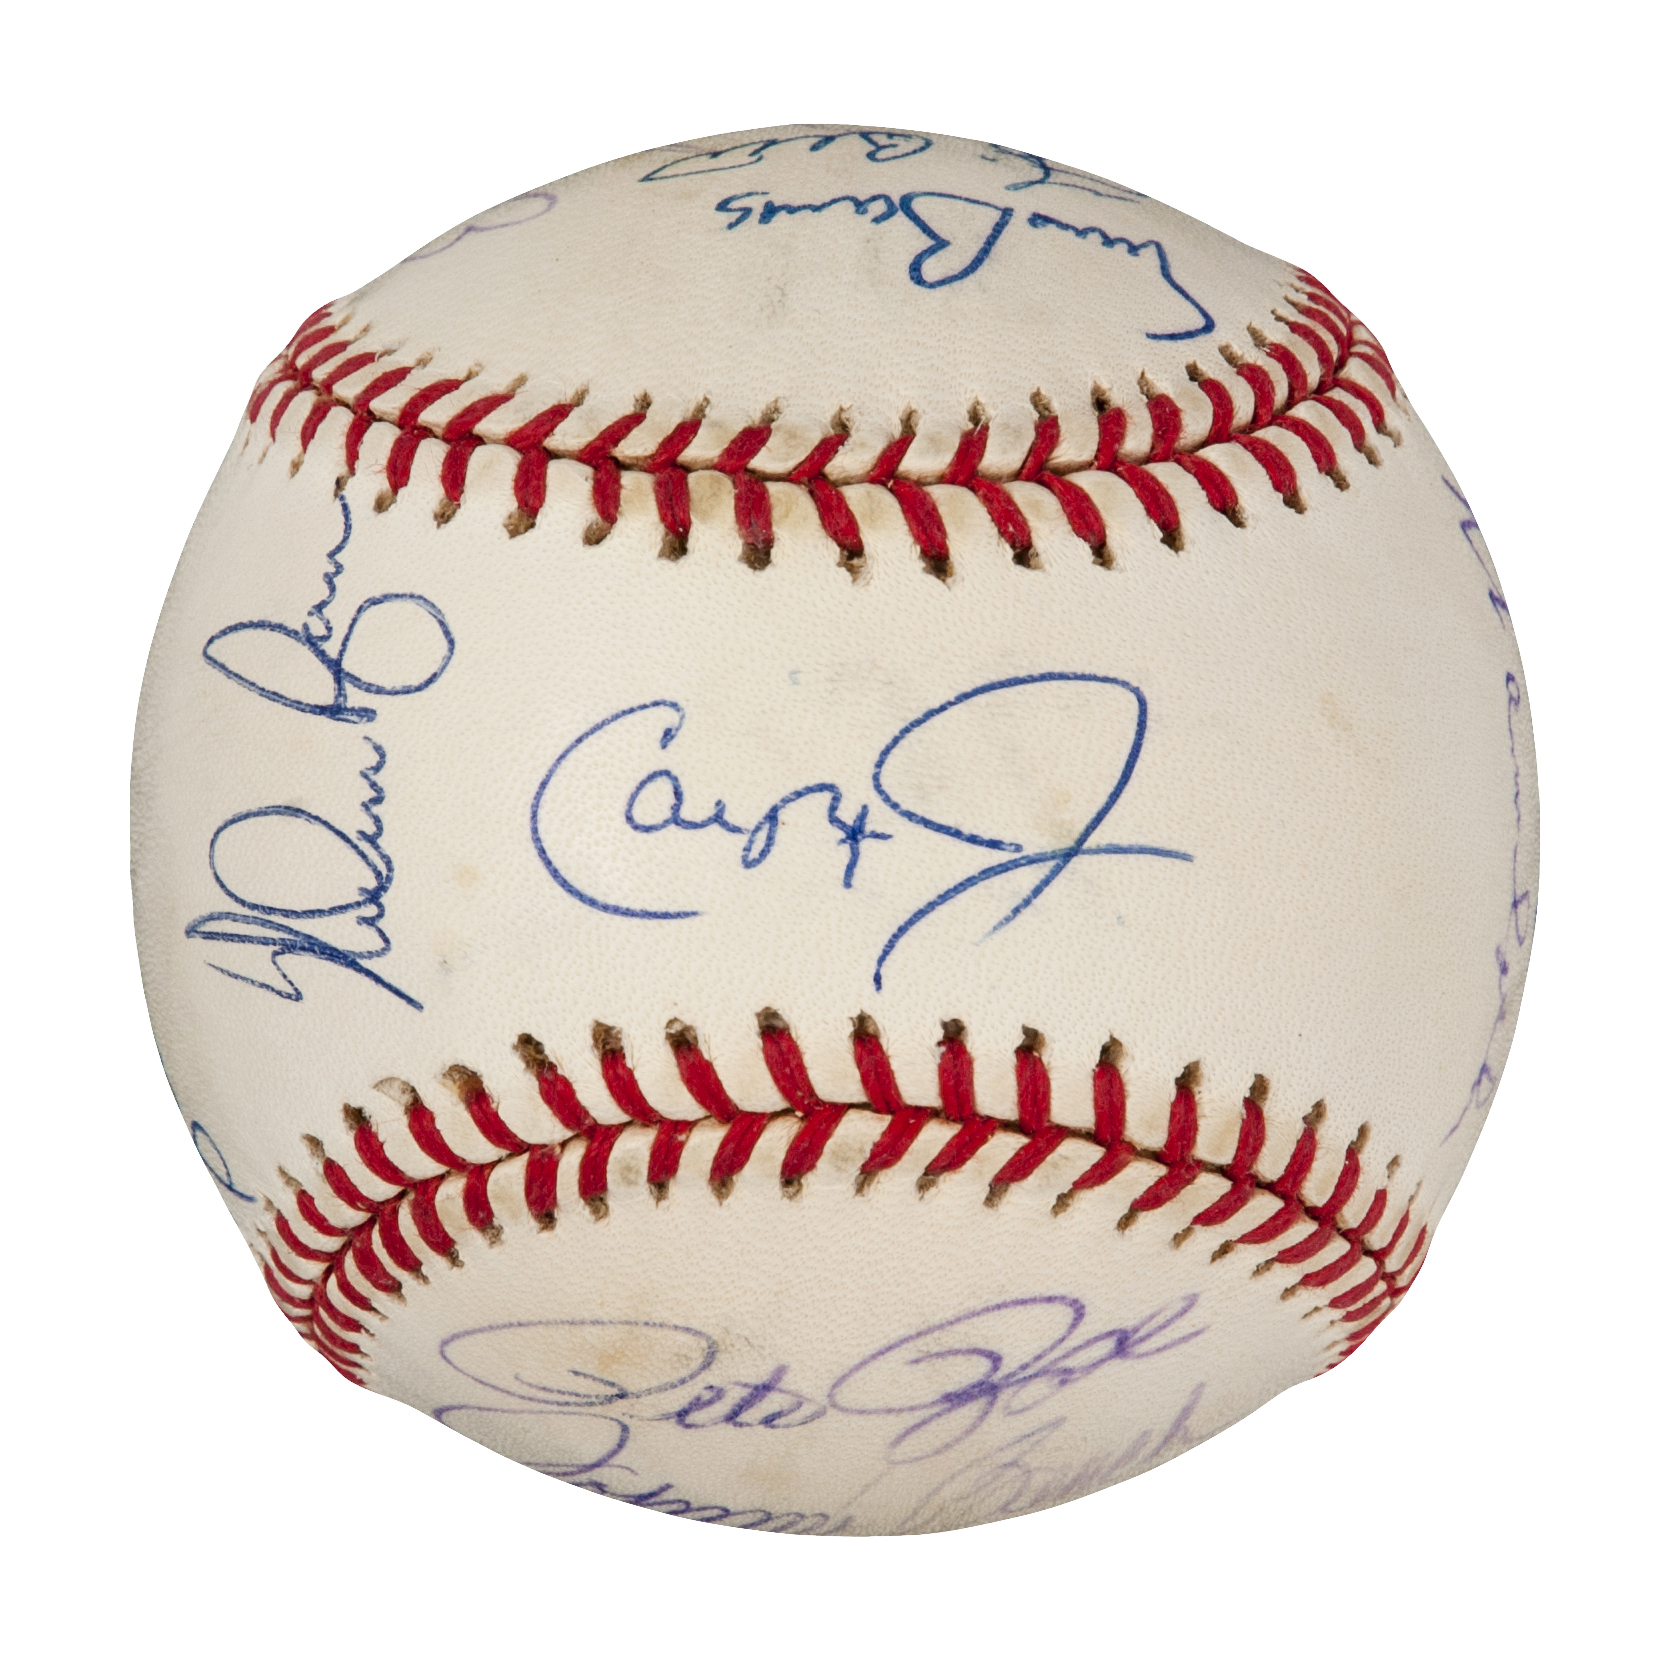 Lot Detail - All-Century Team Multi-Signed Baseball With 12 Signatures (PSA)1670 x 1663